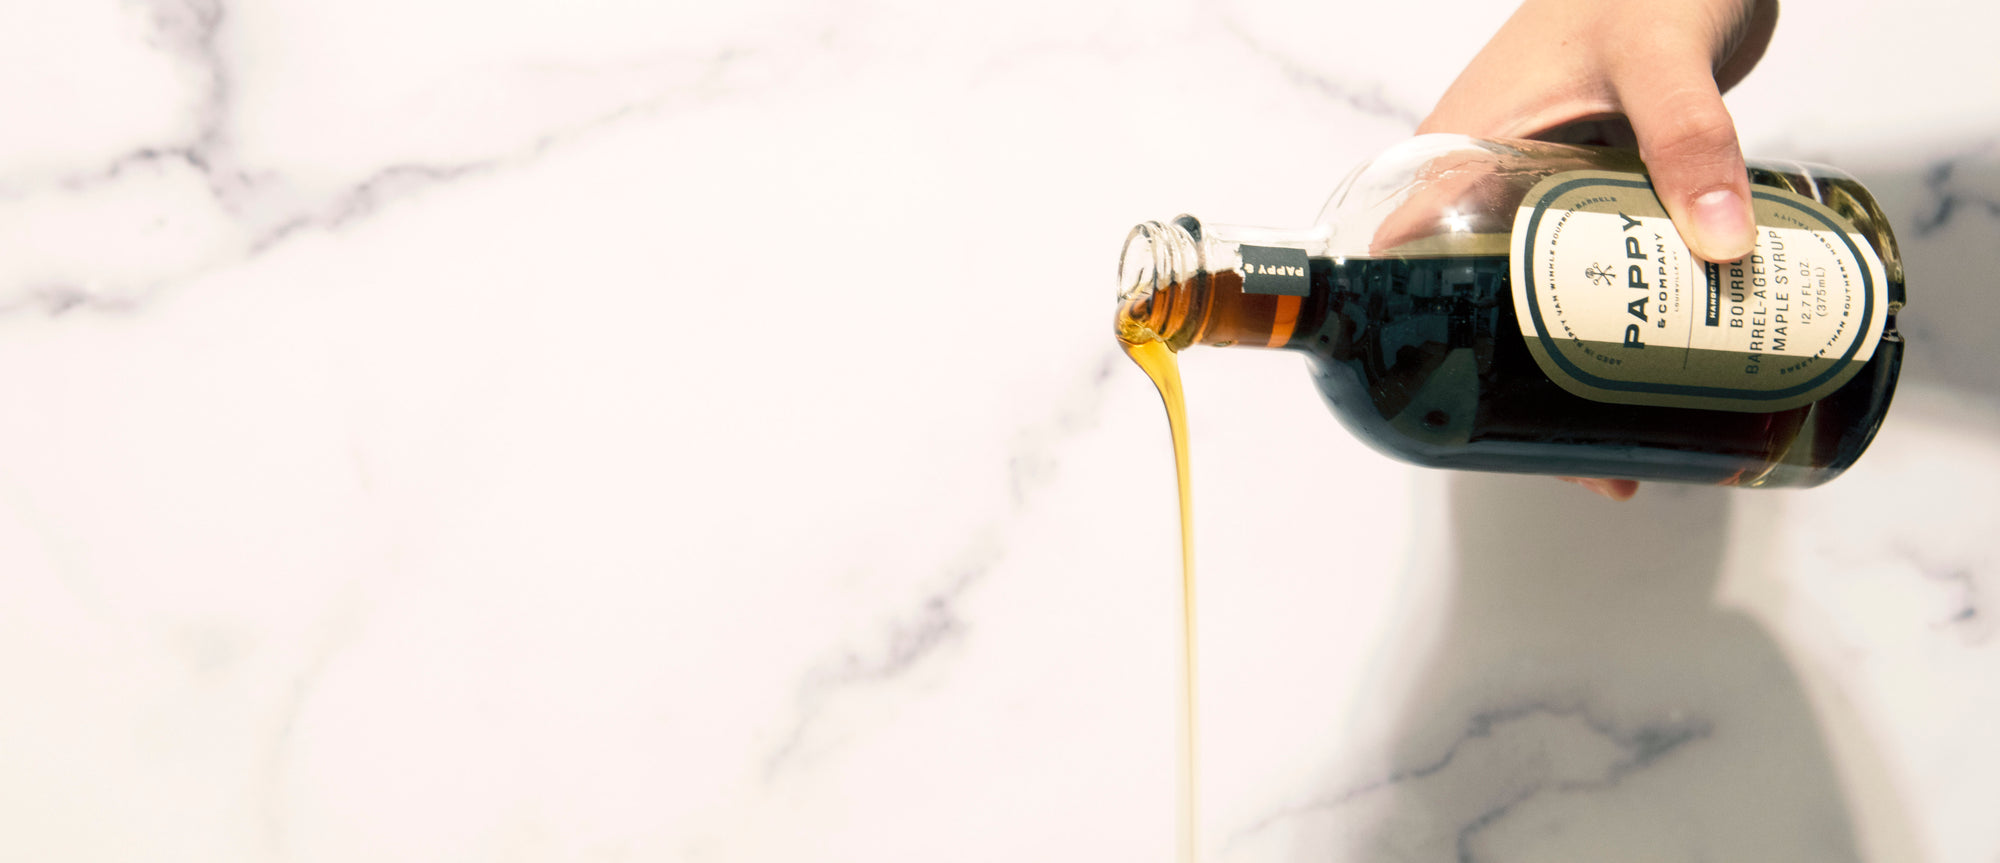 5 Unexpected Ways to Use Our Award-Winning Pappy Van Winkle Bourbon Barrel-Aged Pure Maple Syrup